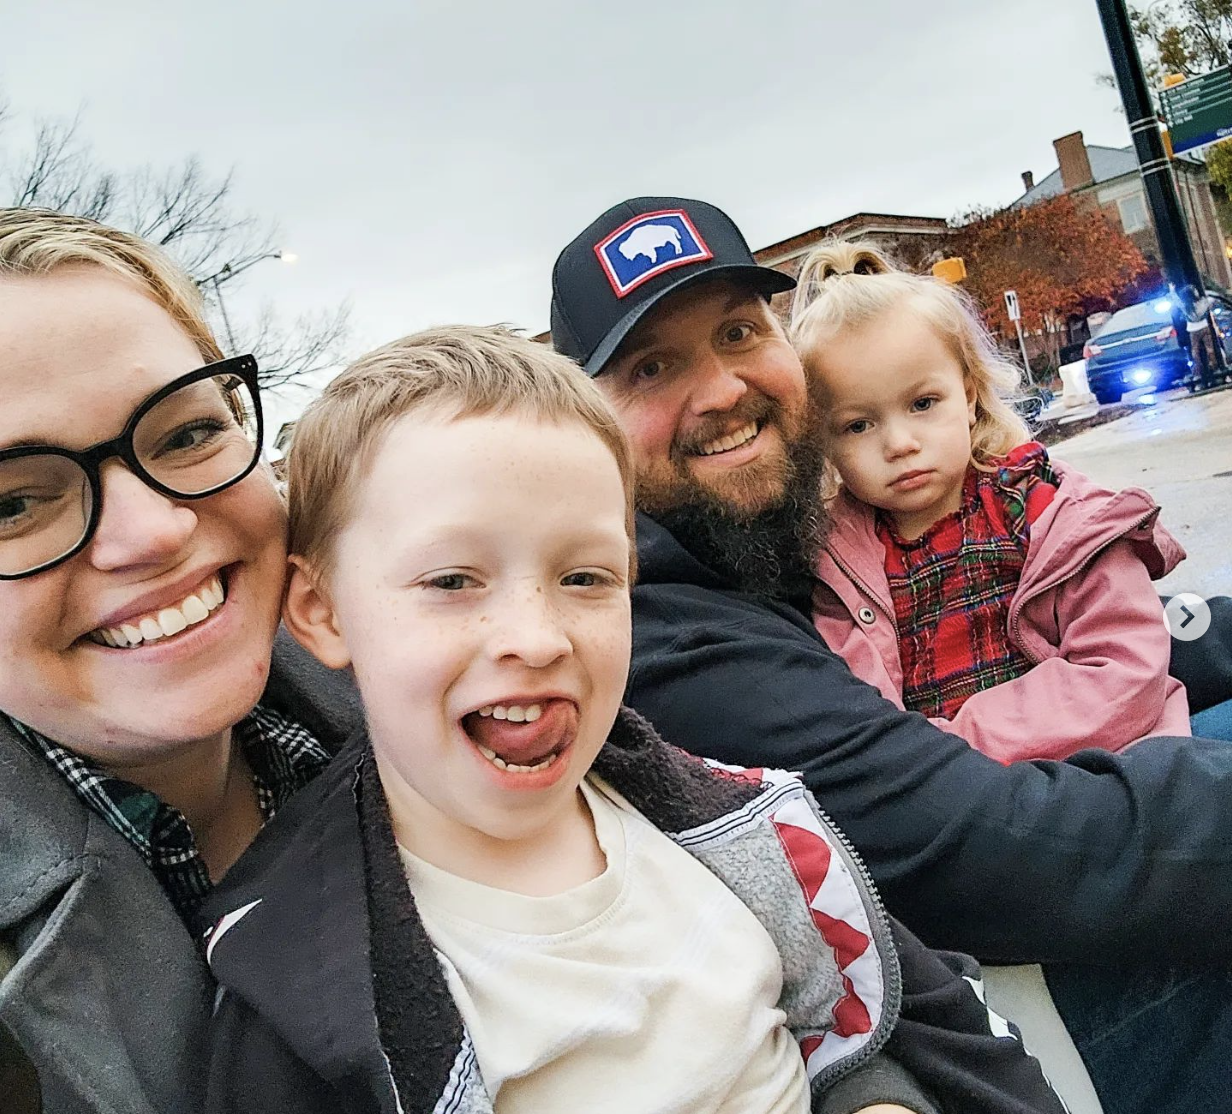 ‘Sister Wives’ Maddie Brown Shares Heartwarming Video of 3-Year-Old Daughter Riding a Scooter with Prosthetic Leg